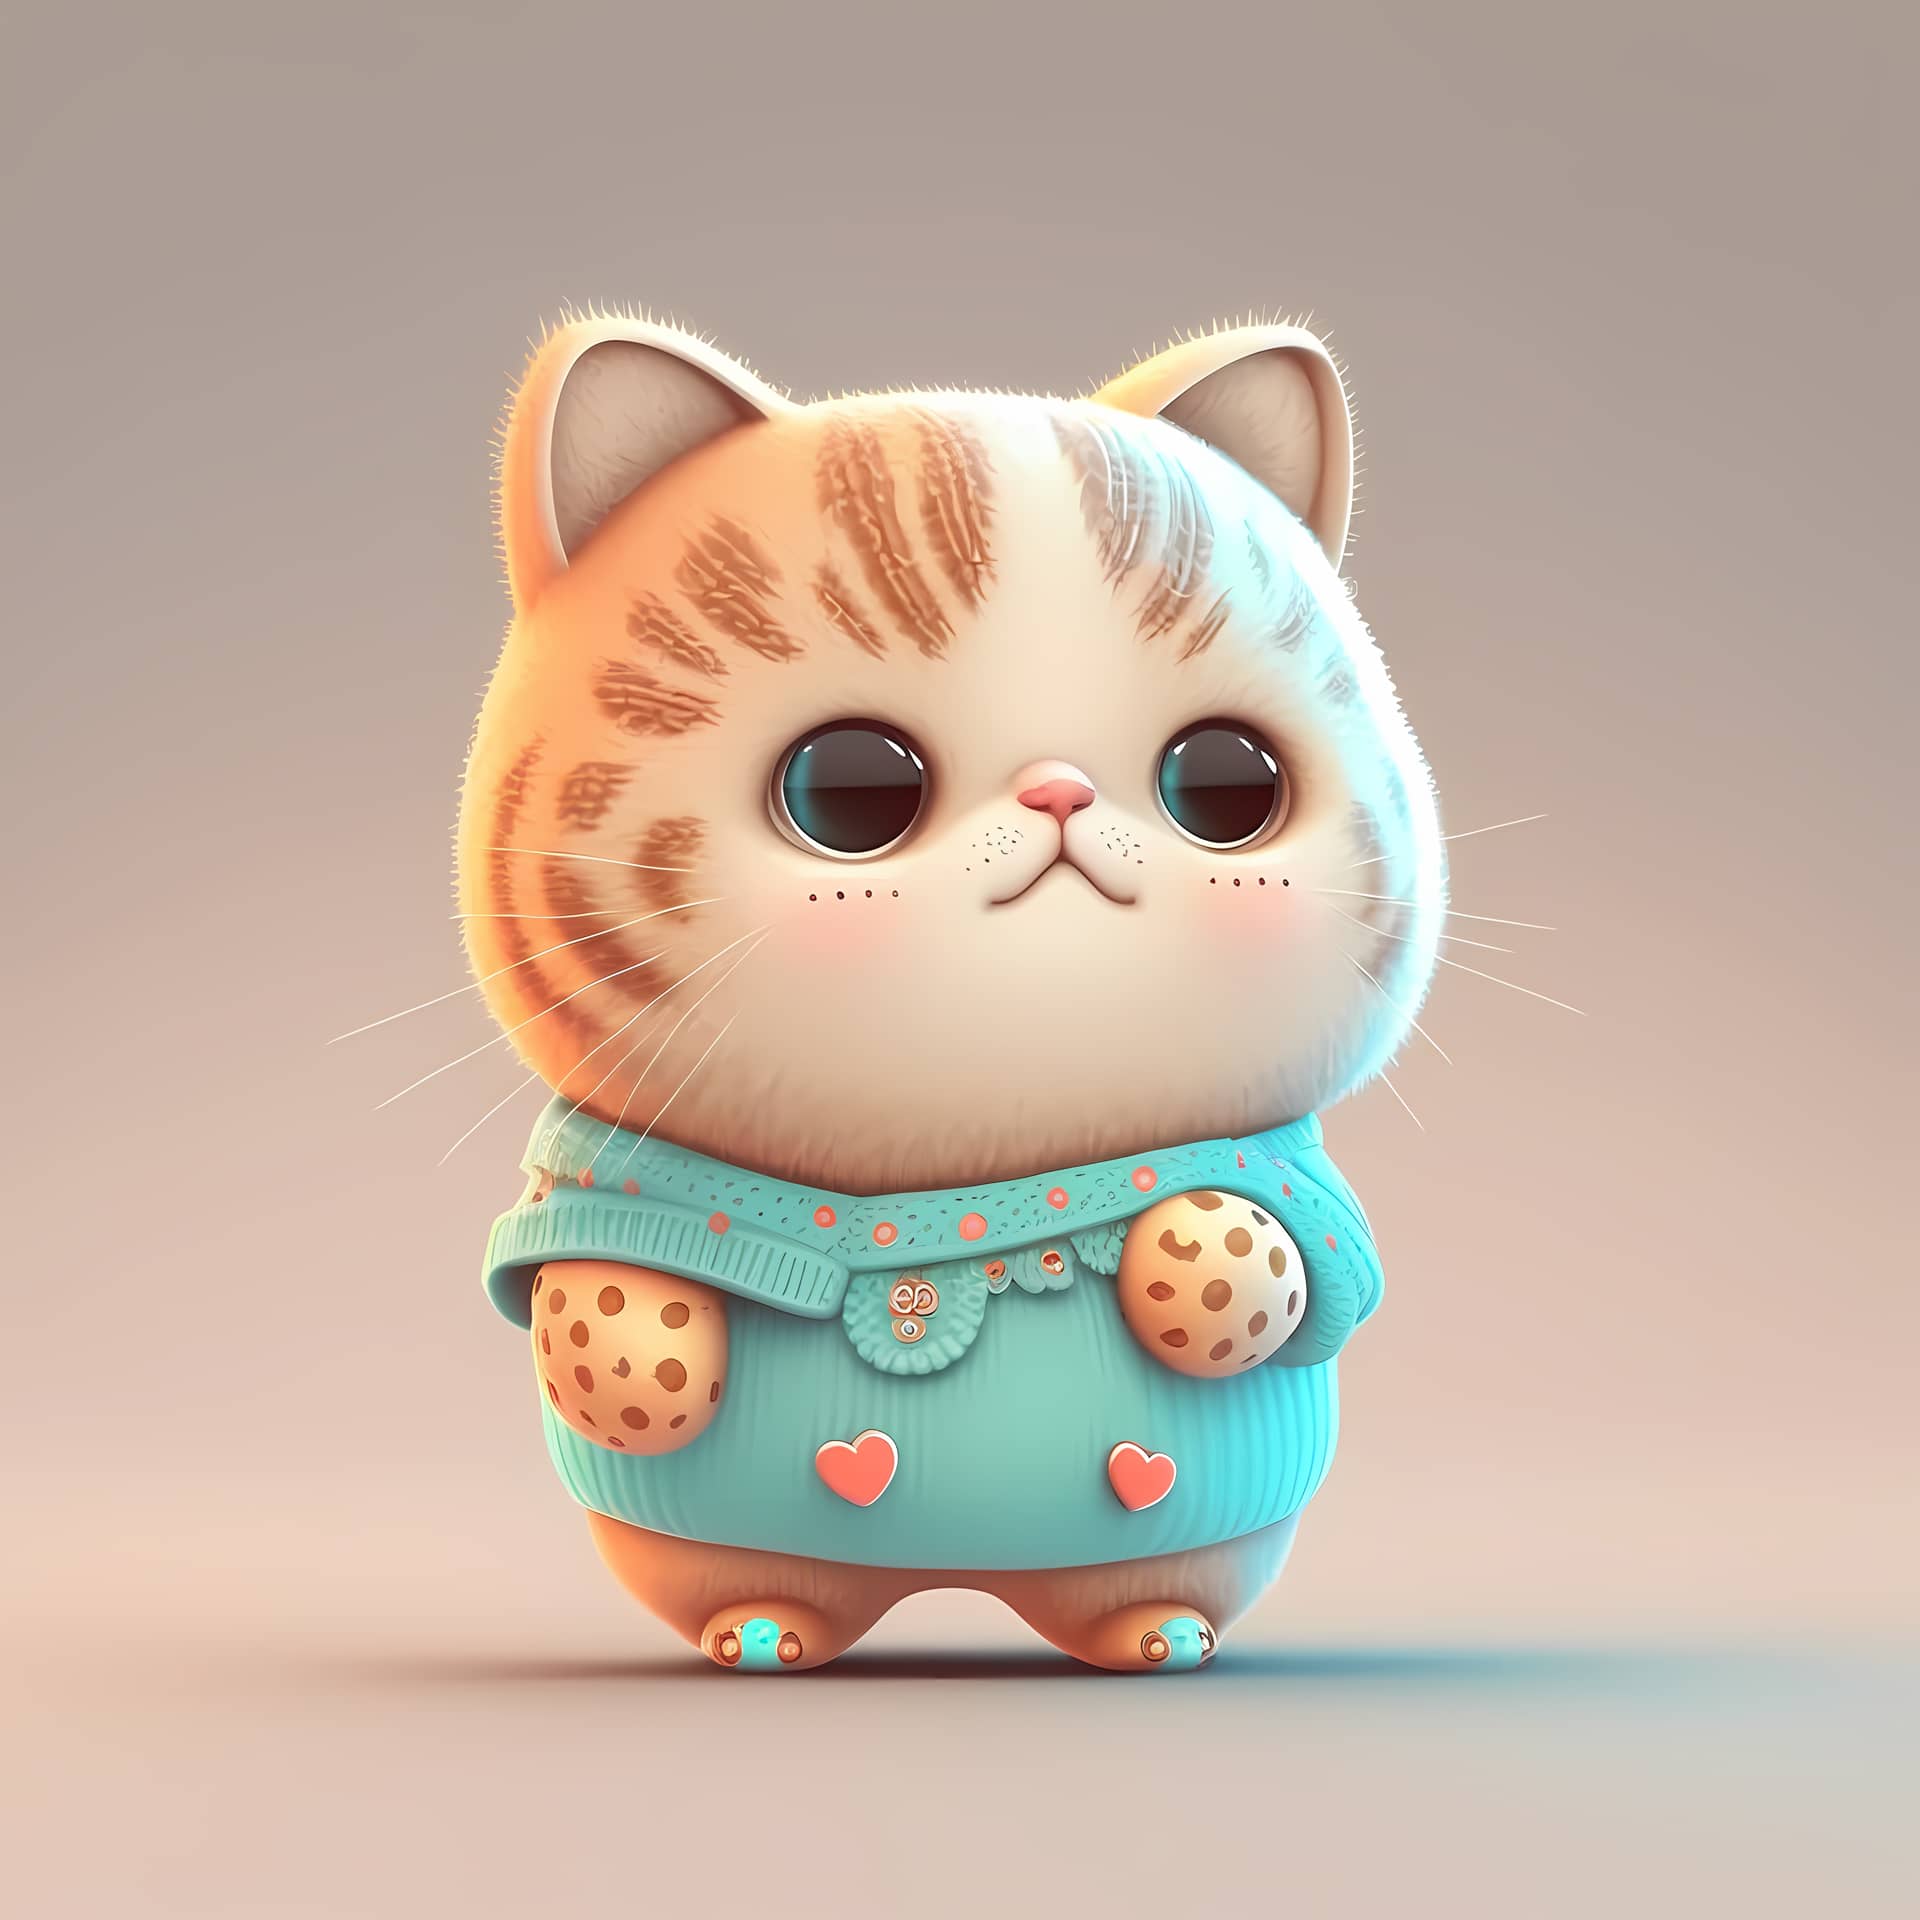 Cute profile photos cat characters wear cute funny colorful clothes excellent image